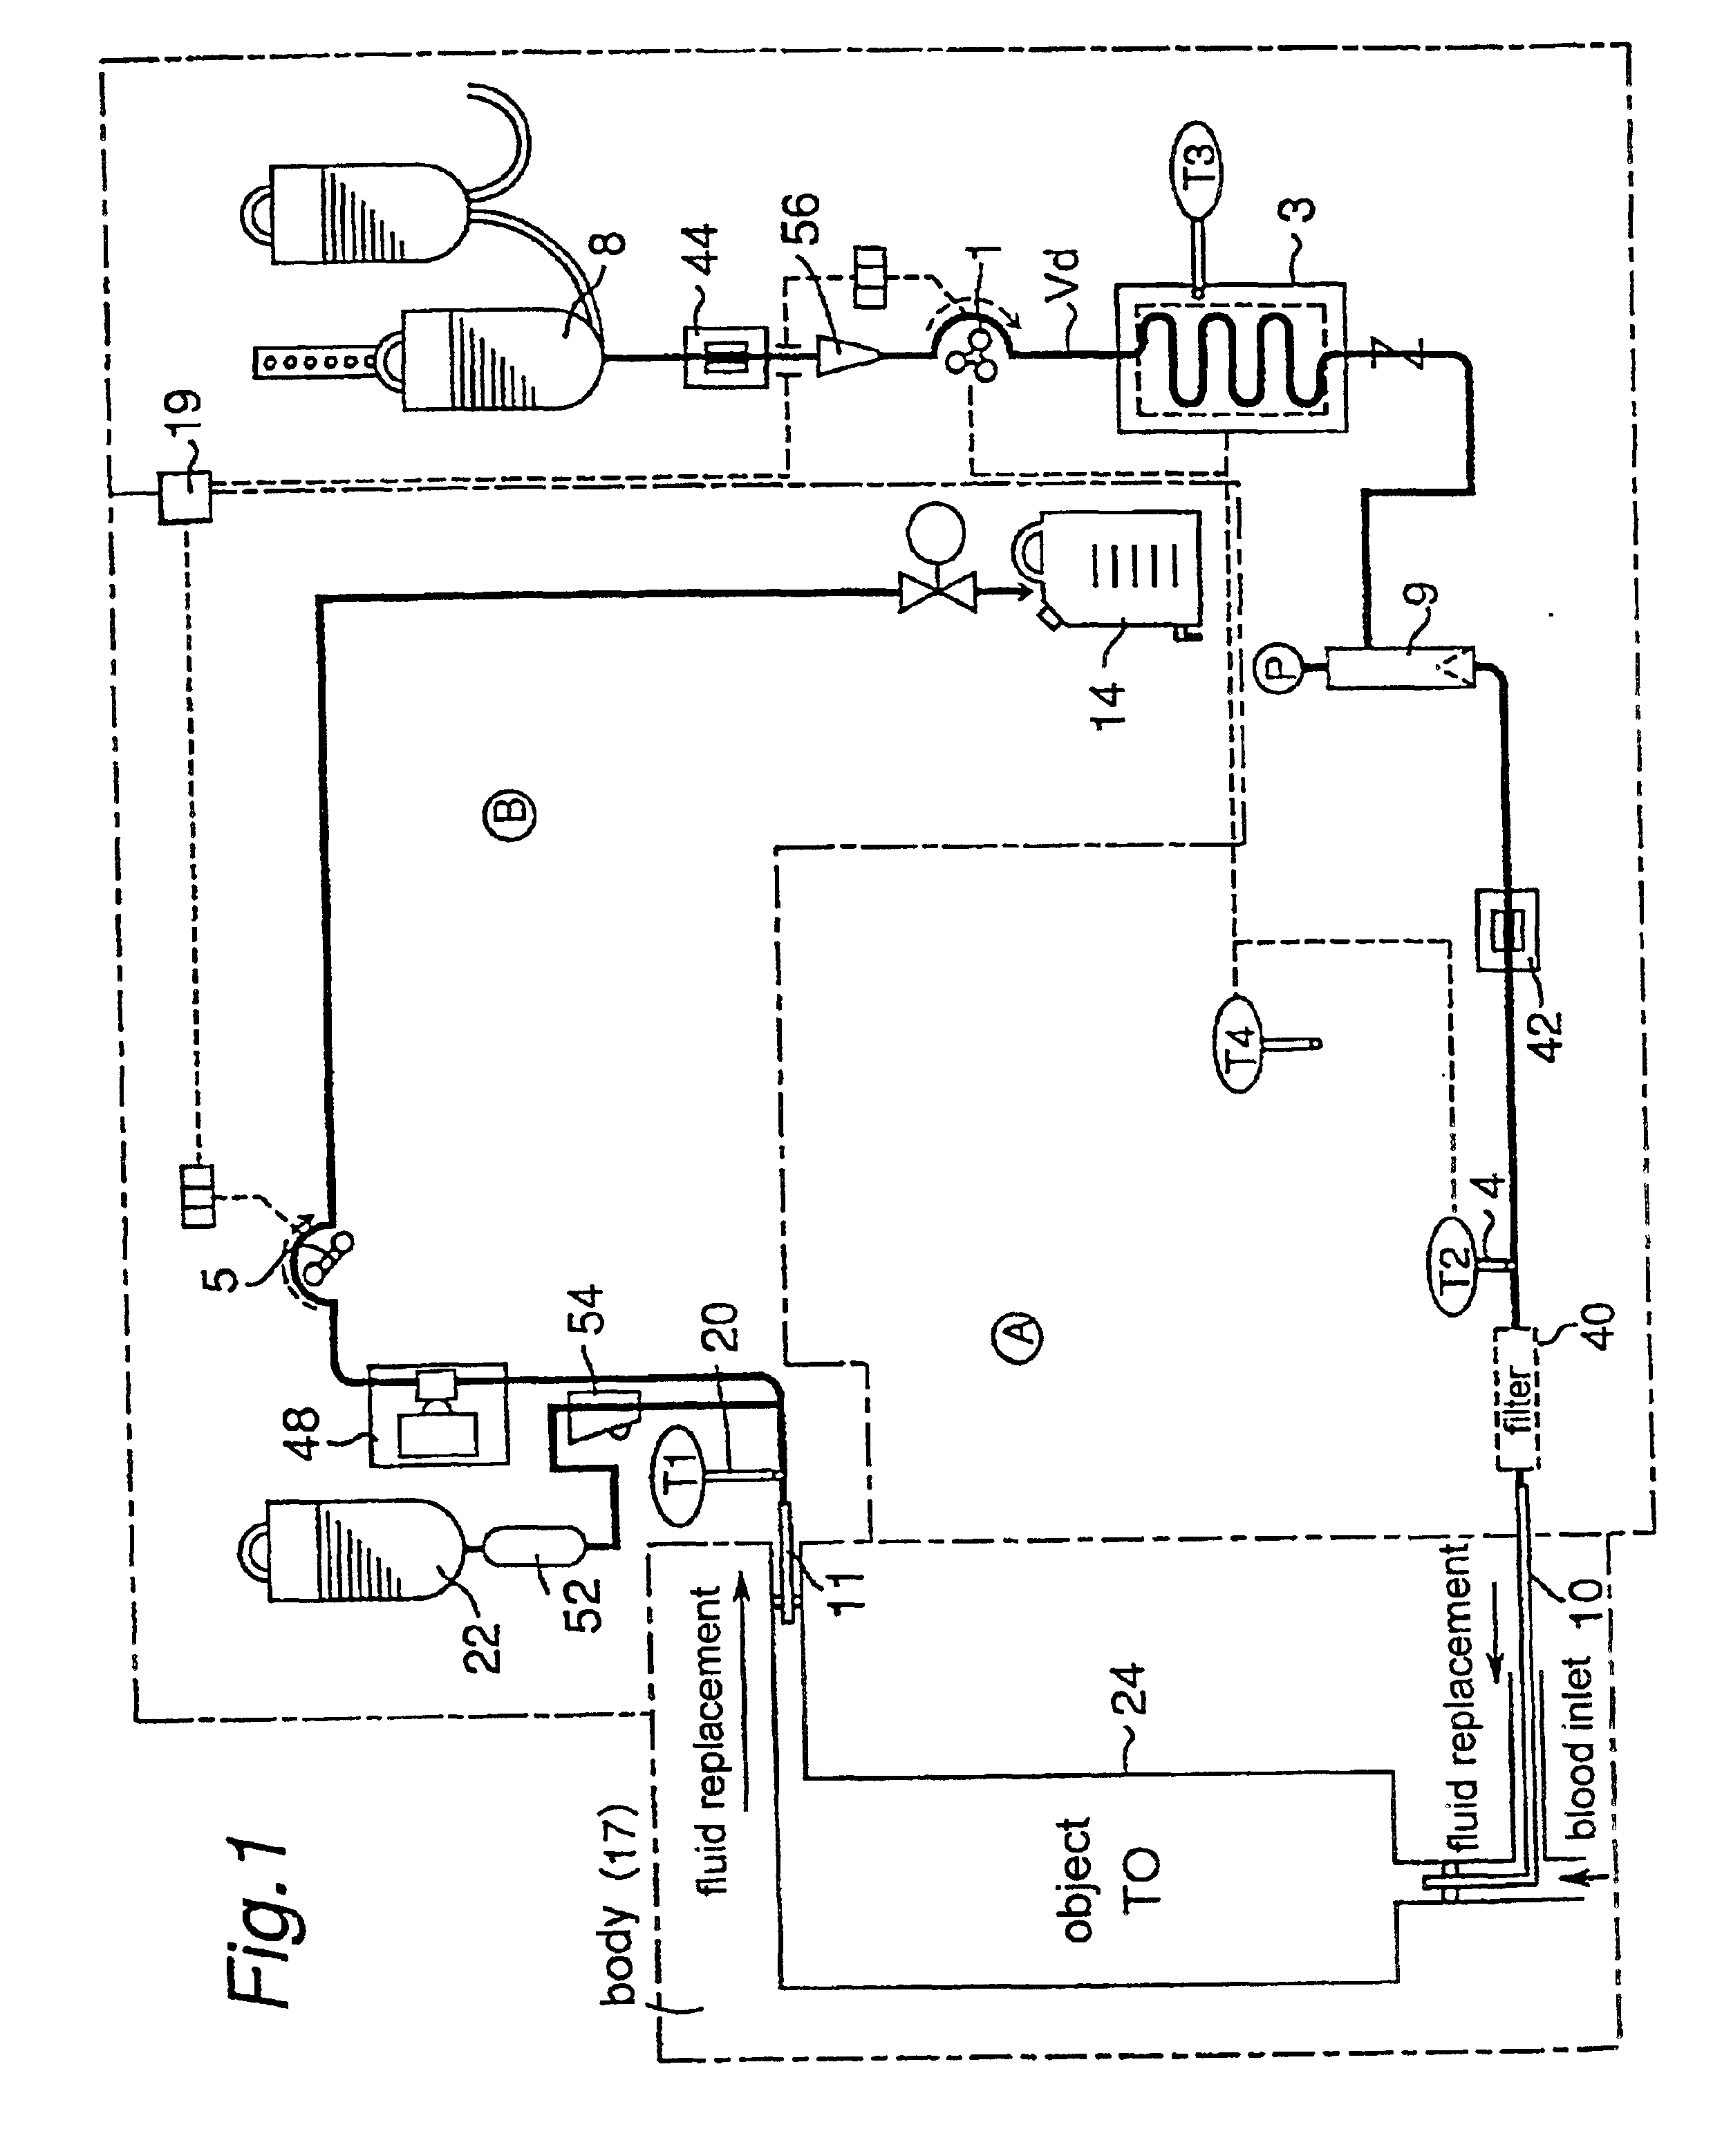 Bloodless treating apparatus